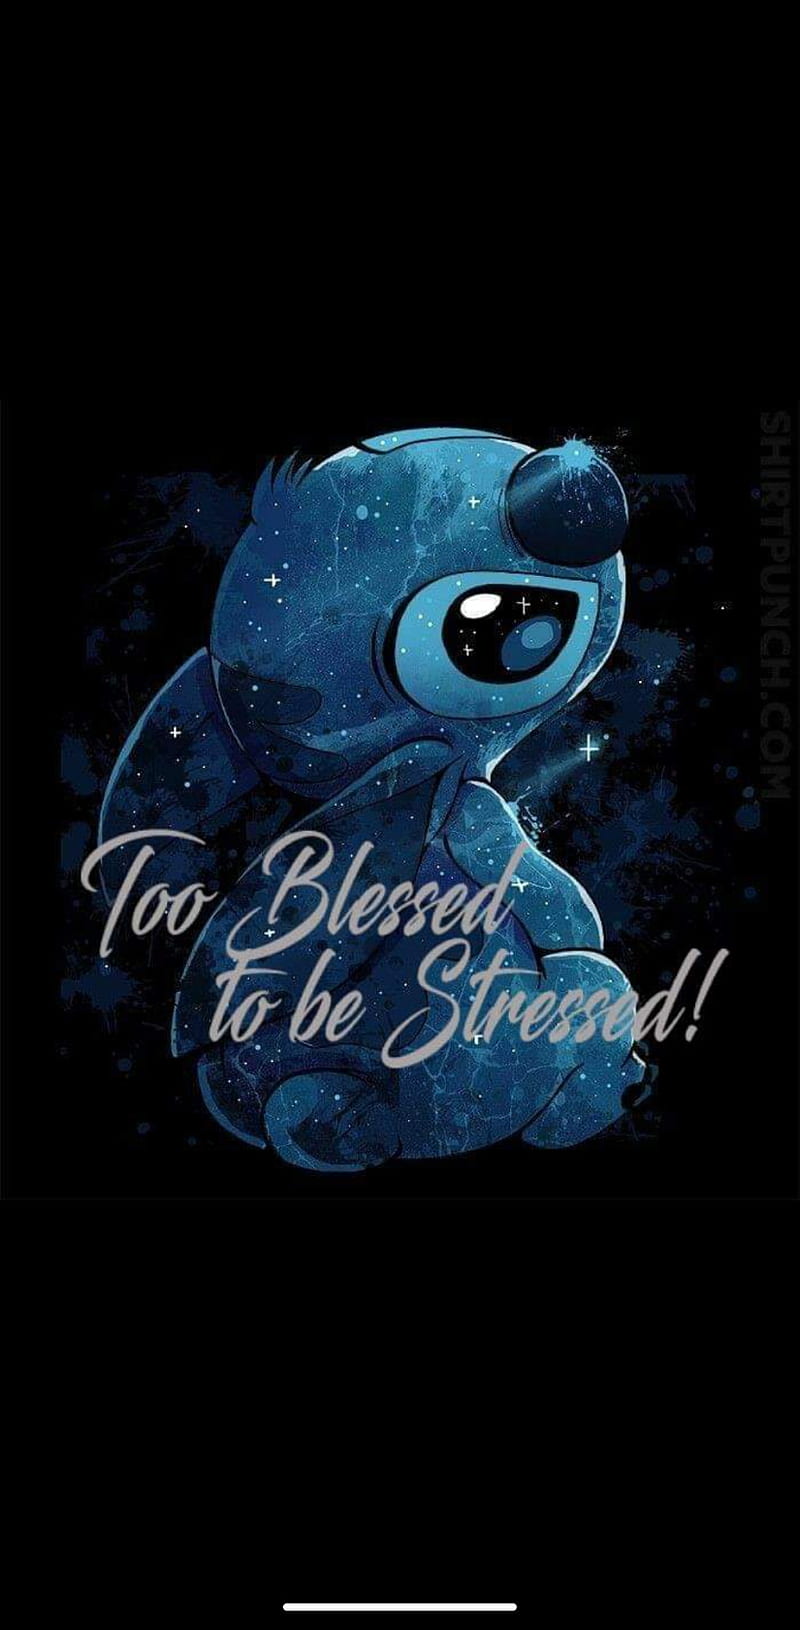 2Blessed2BeStressed, blessed, blue, cartoon, disney, effect, happy, love, mass, stitch, stressed, HD phone wallpaper